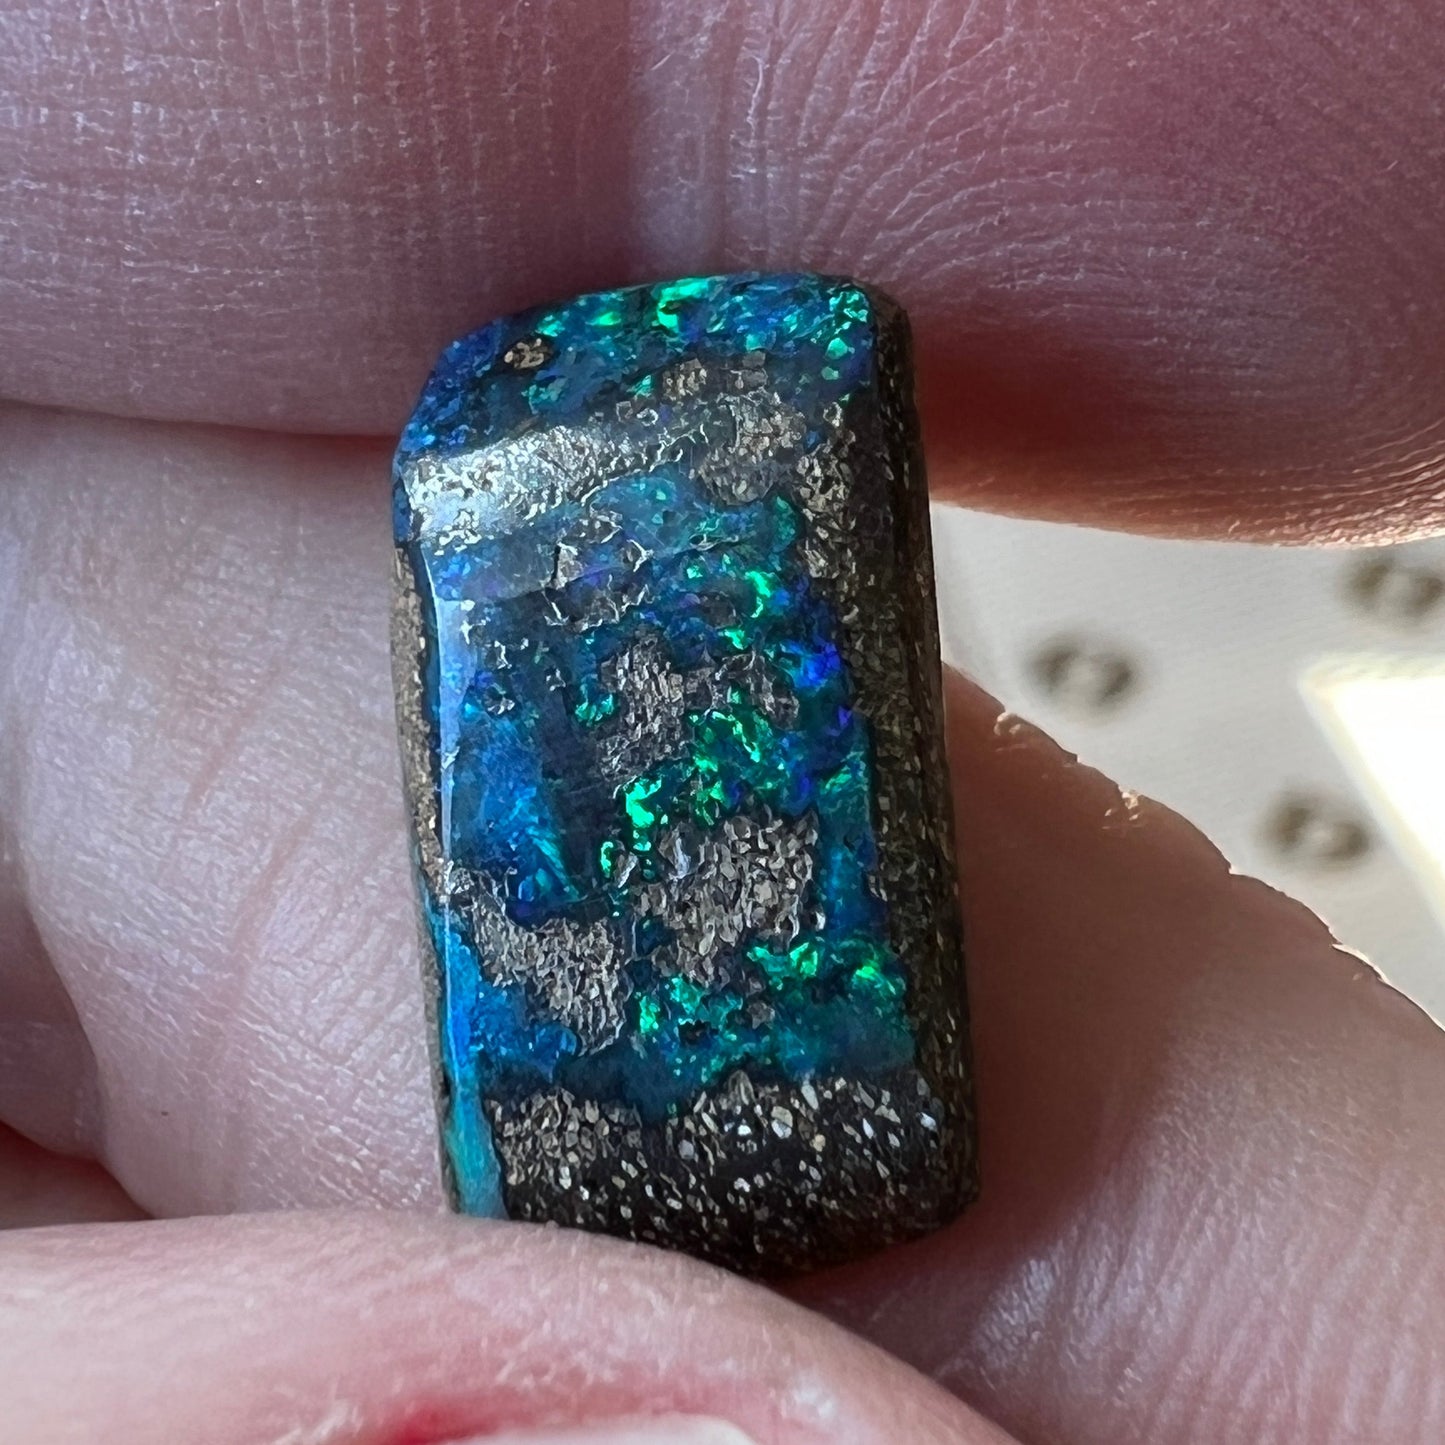 Nice greens and blues are shown within this lovely Winton boulder opal.